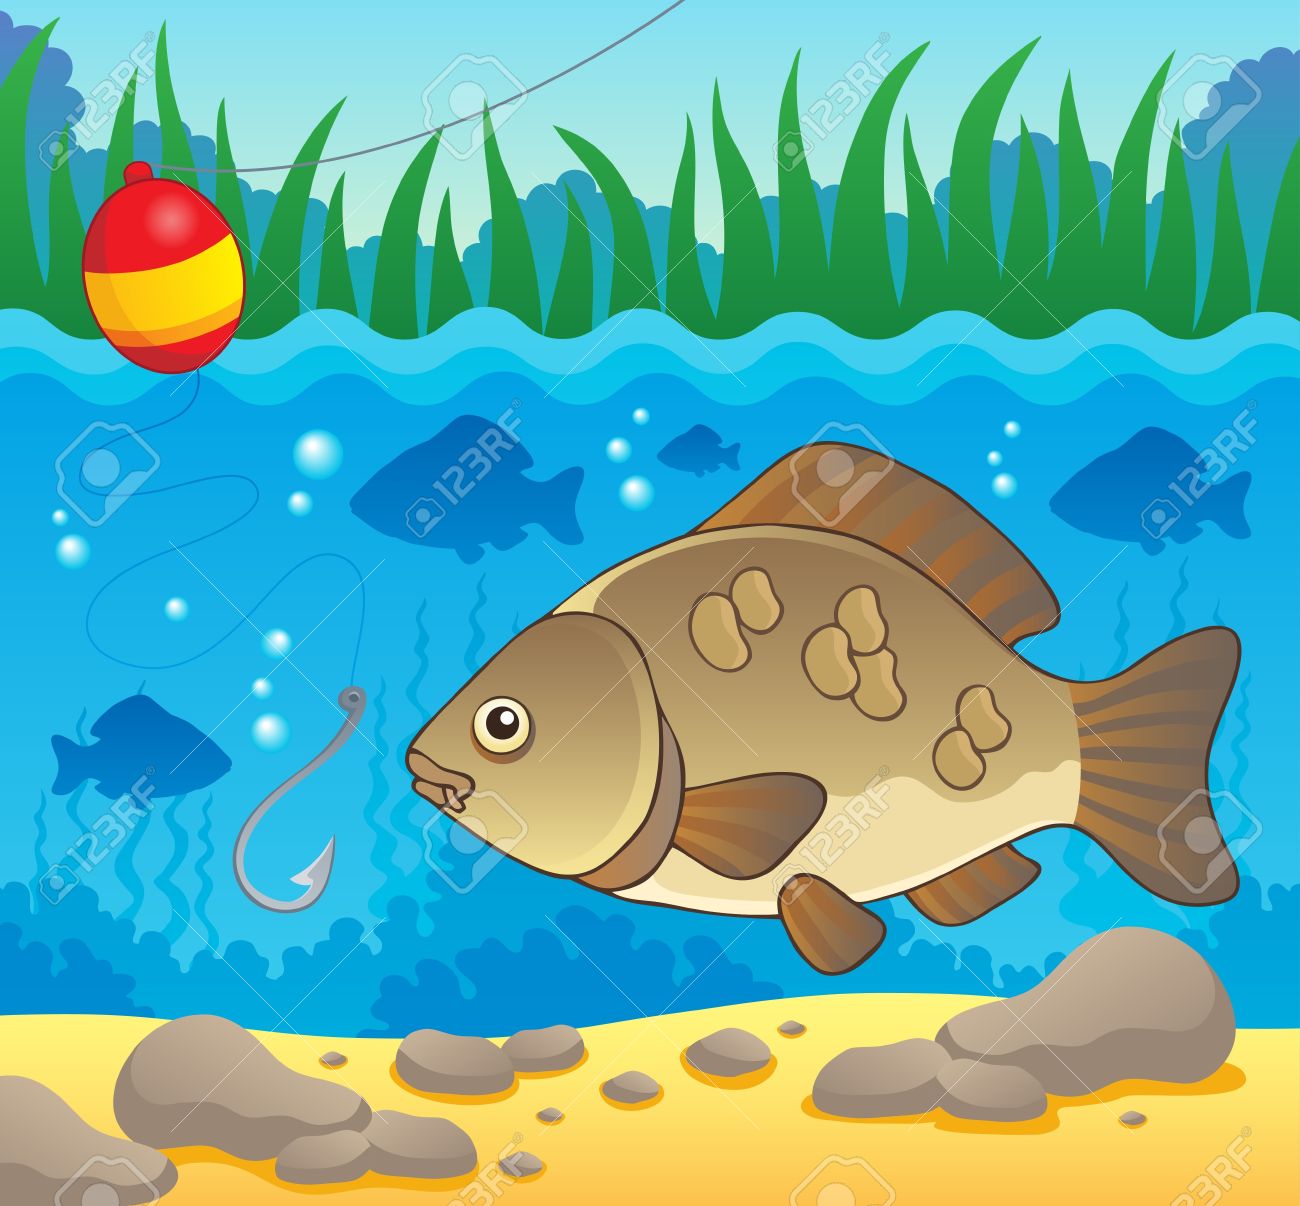 Water with fish clipart